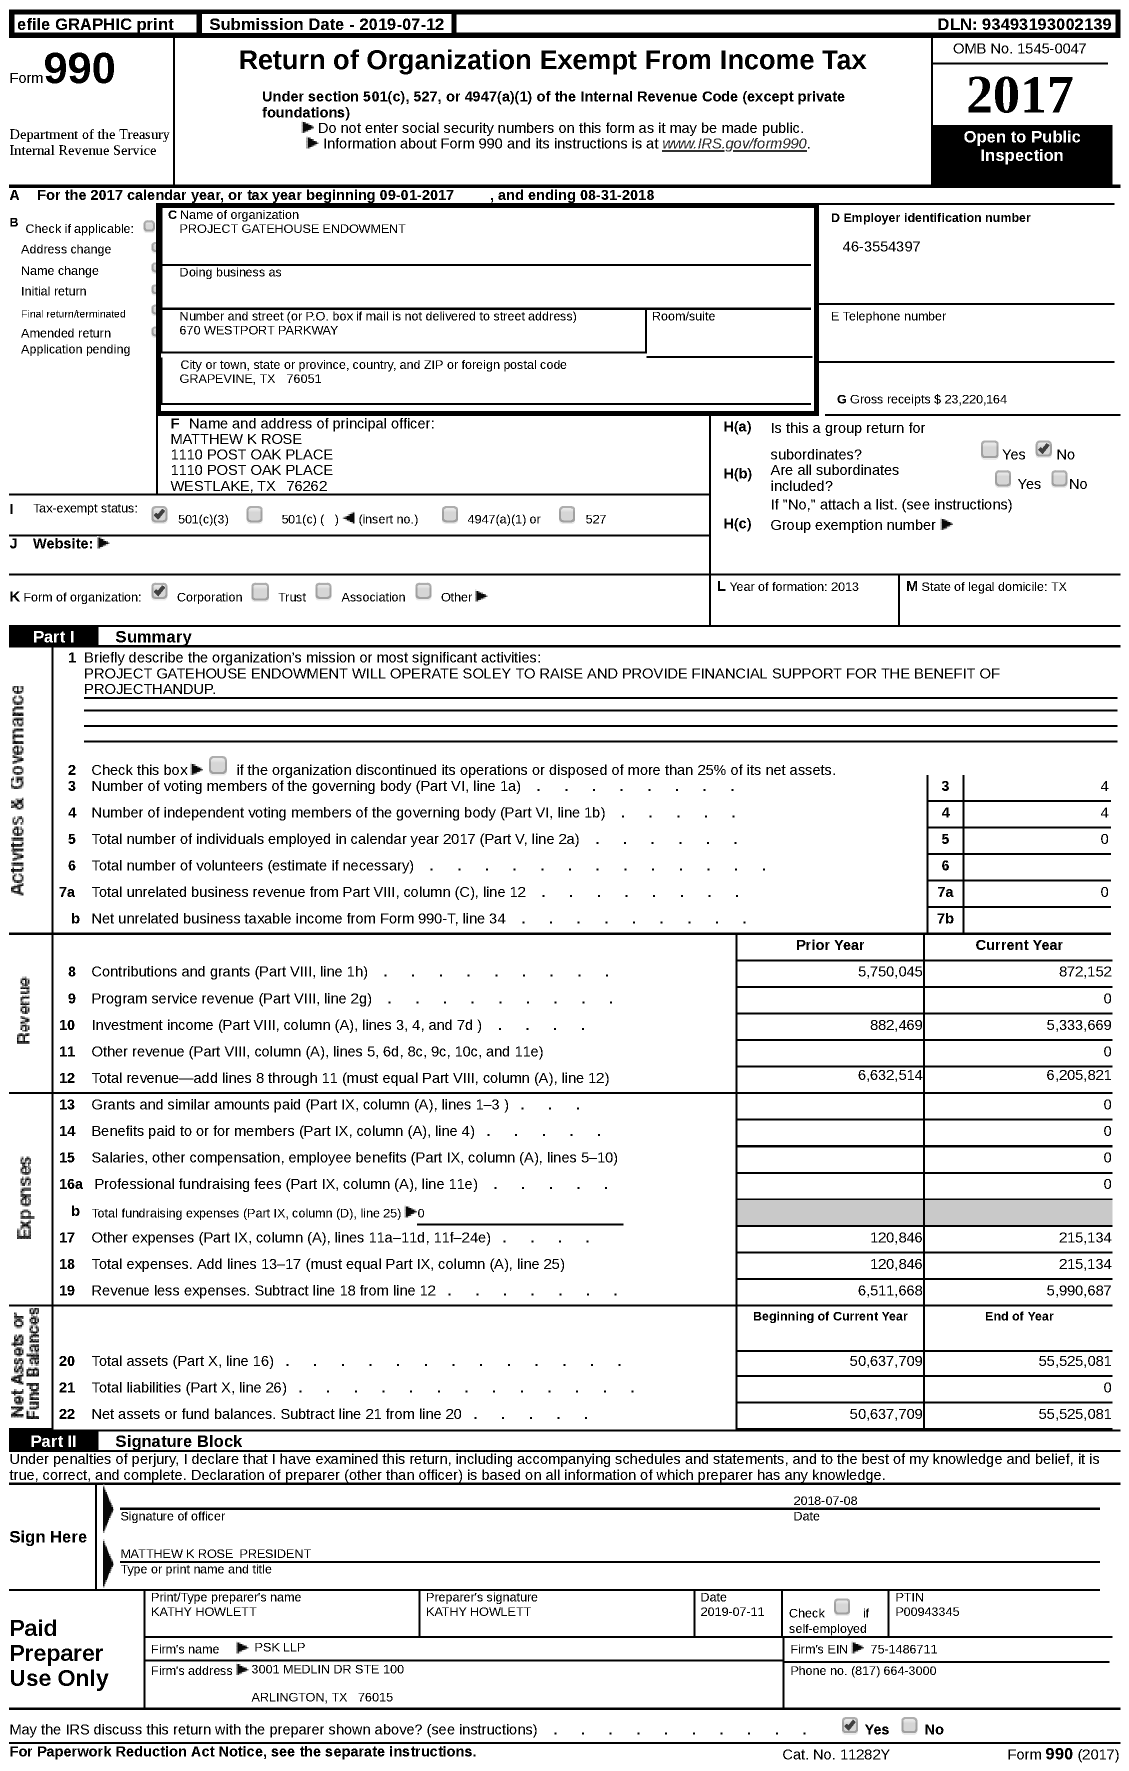 Image of first page of 2017 Form 990 for Open990